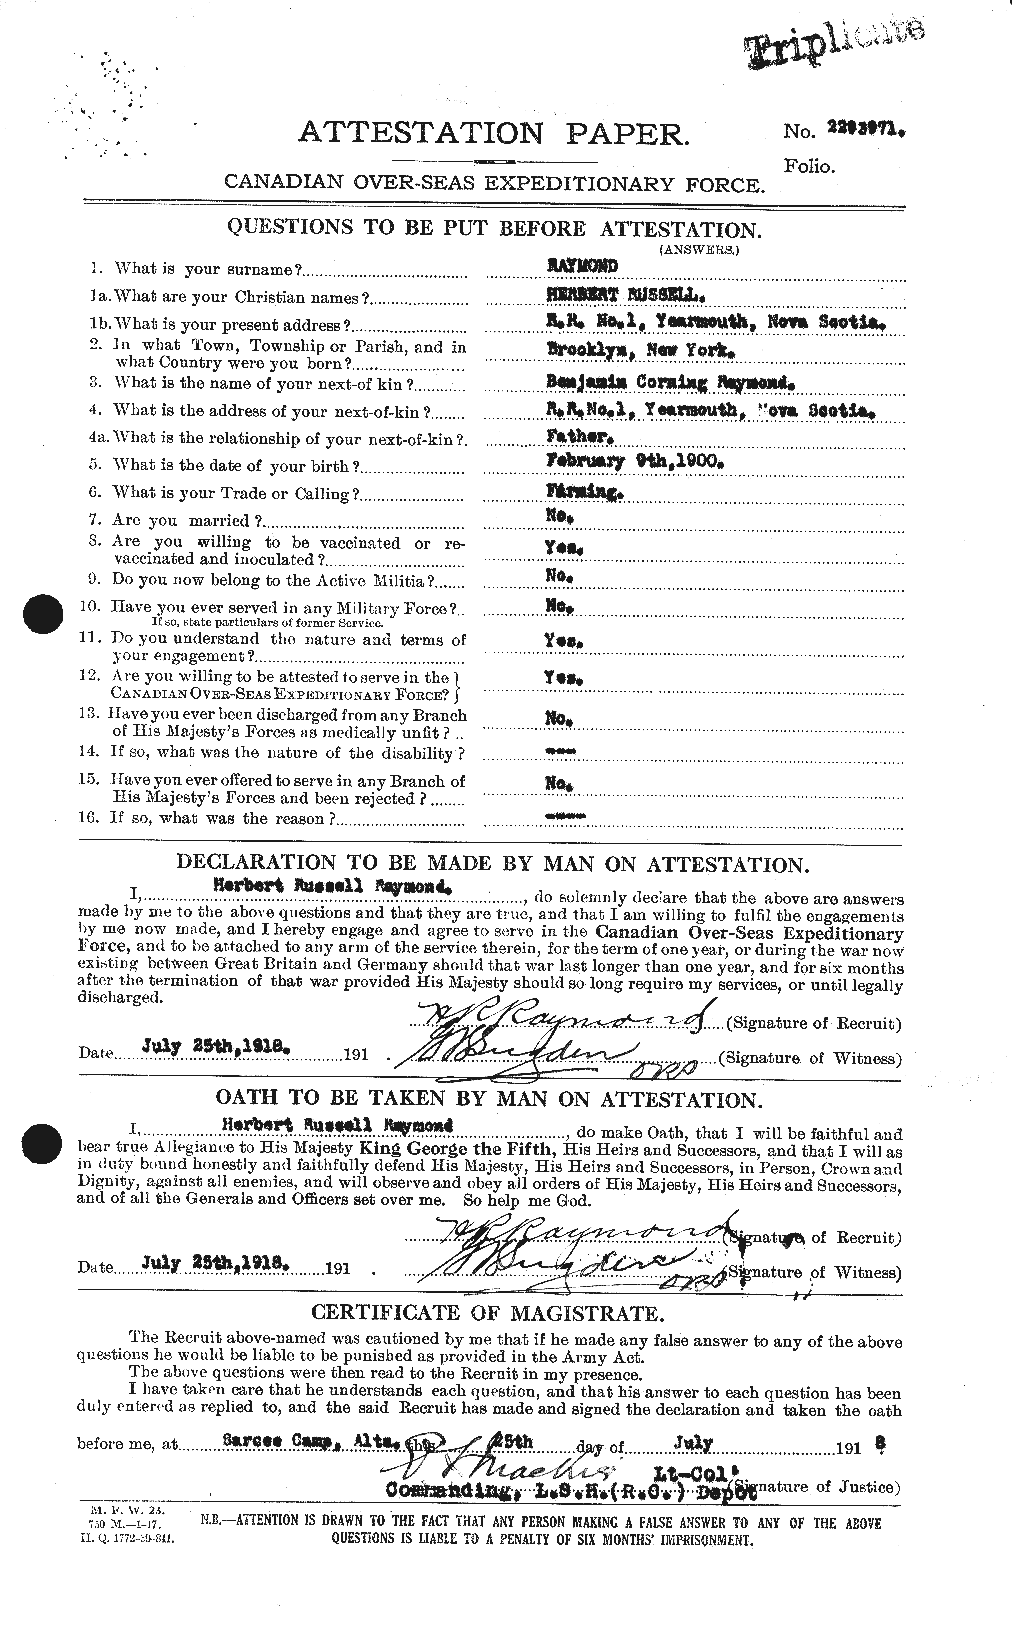 Personnel Records of the First World War - CEF 595357a